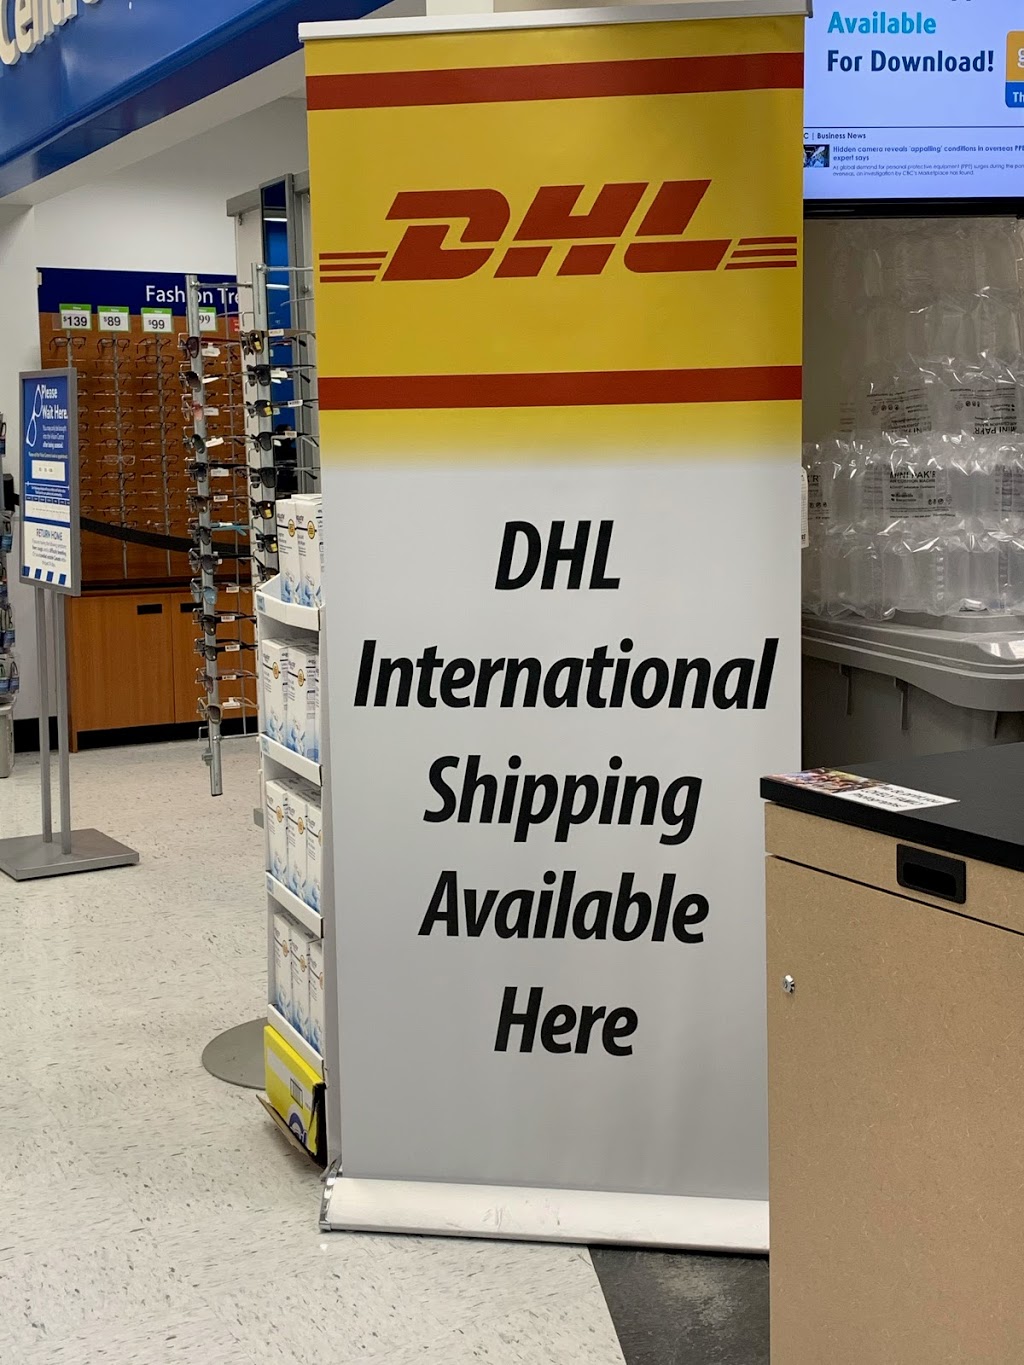 DHL International Shipping Centre 7 days a week | The UPS Store inside Walmart, 3155 Argentia Rd, Mississauga, ON L5N 8E1, Canada | Phone: (905) 785-1000